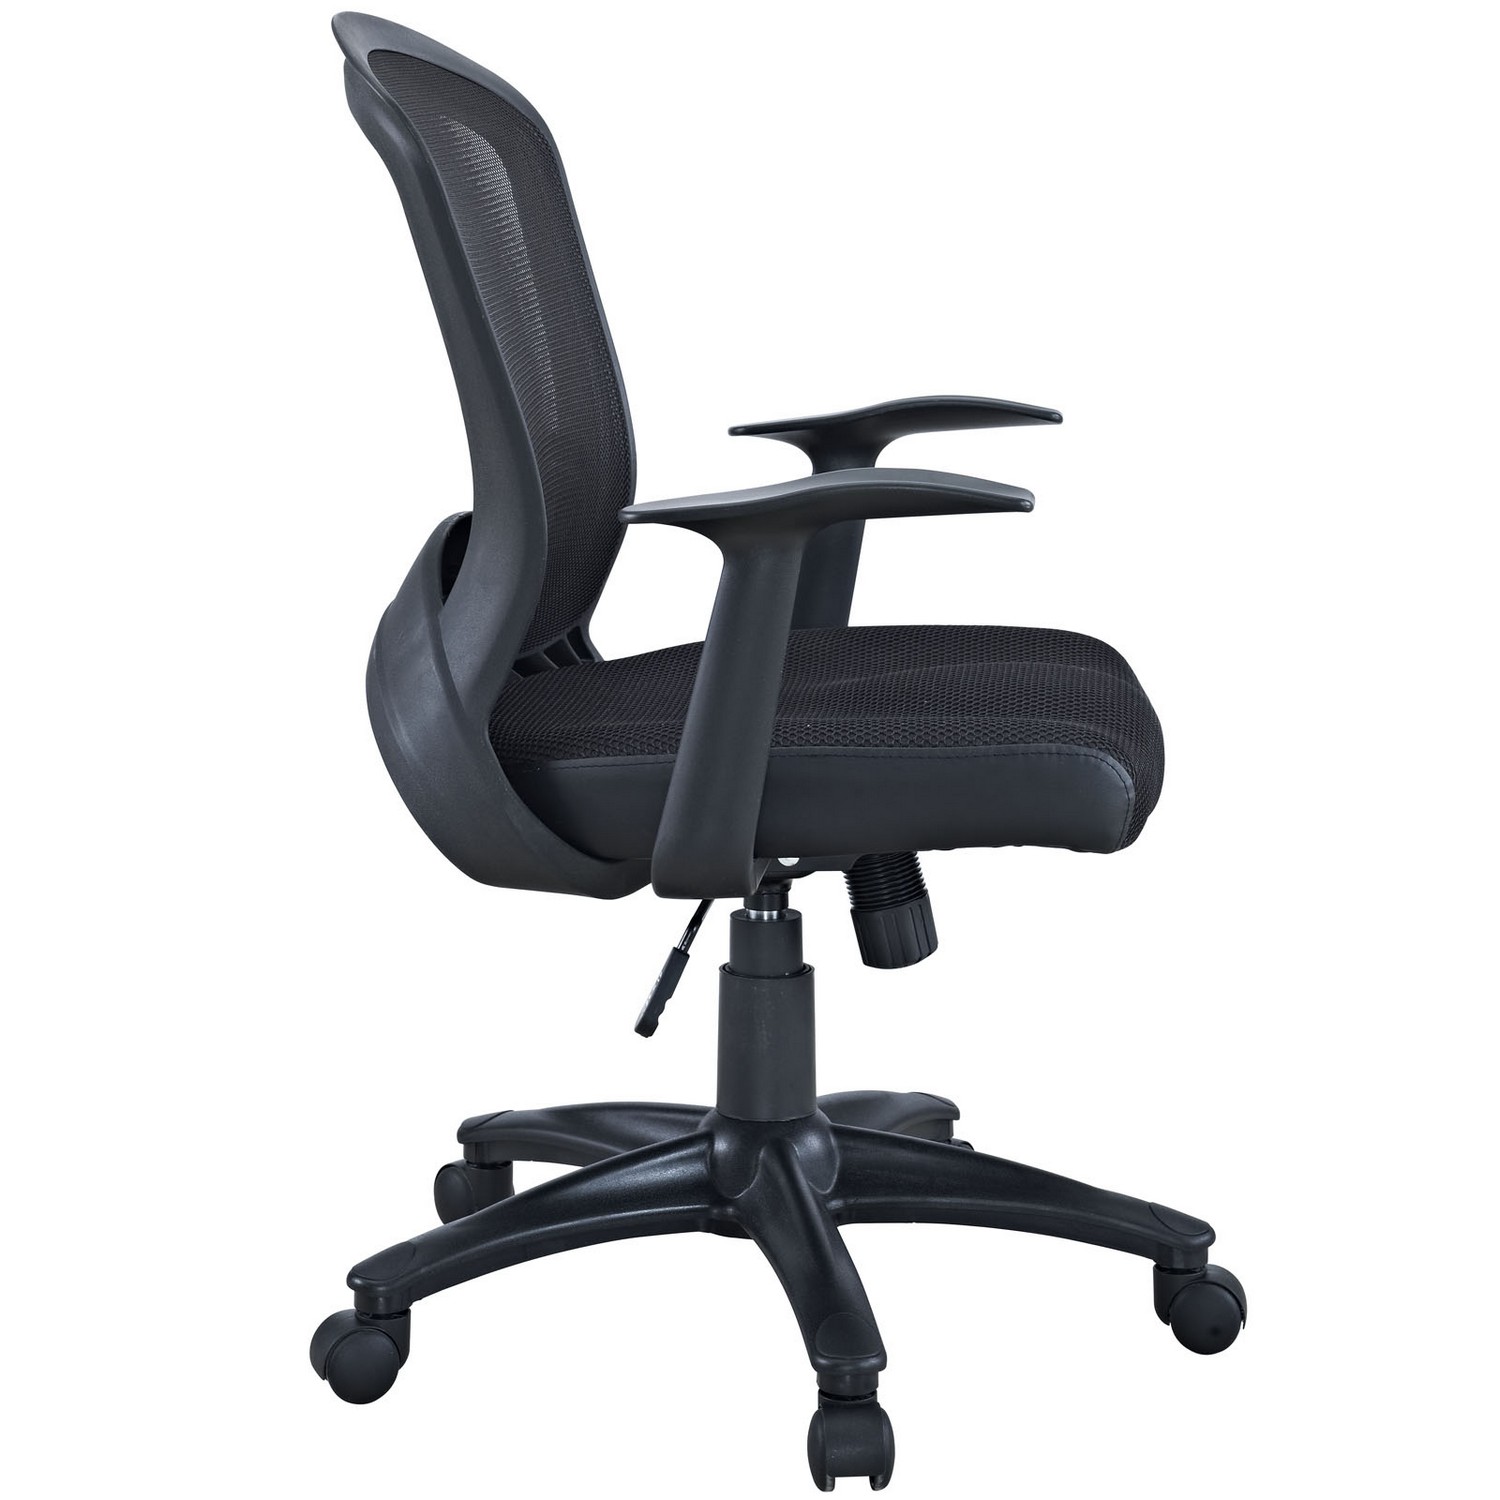 Modway Pulse Mesh Office Chair - Black